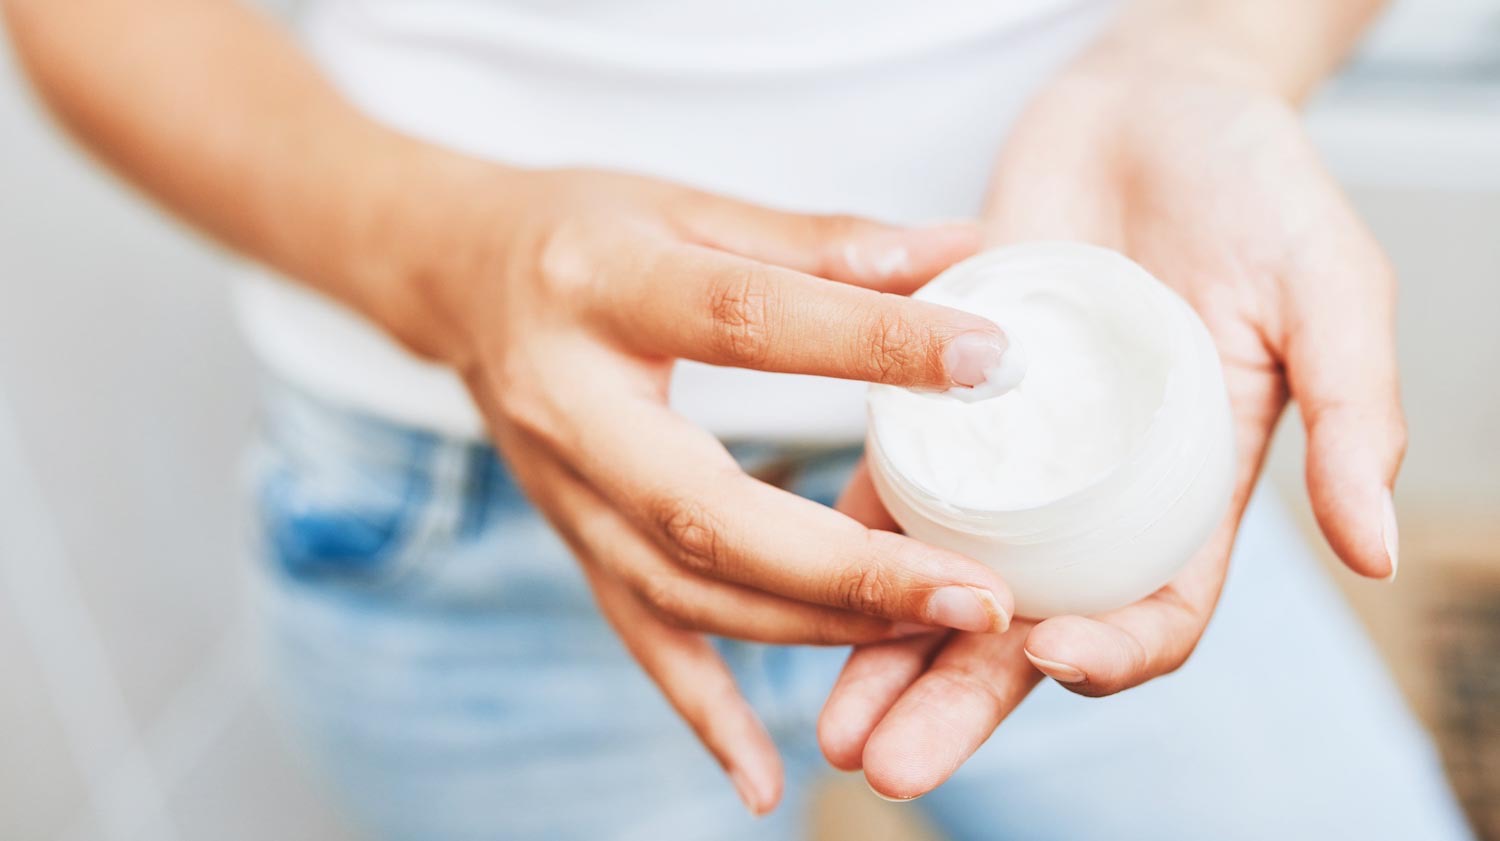 Close up image of a person holding a tub of moisturizer.